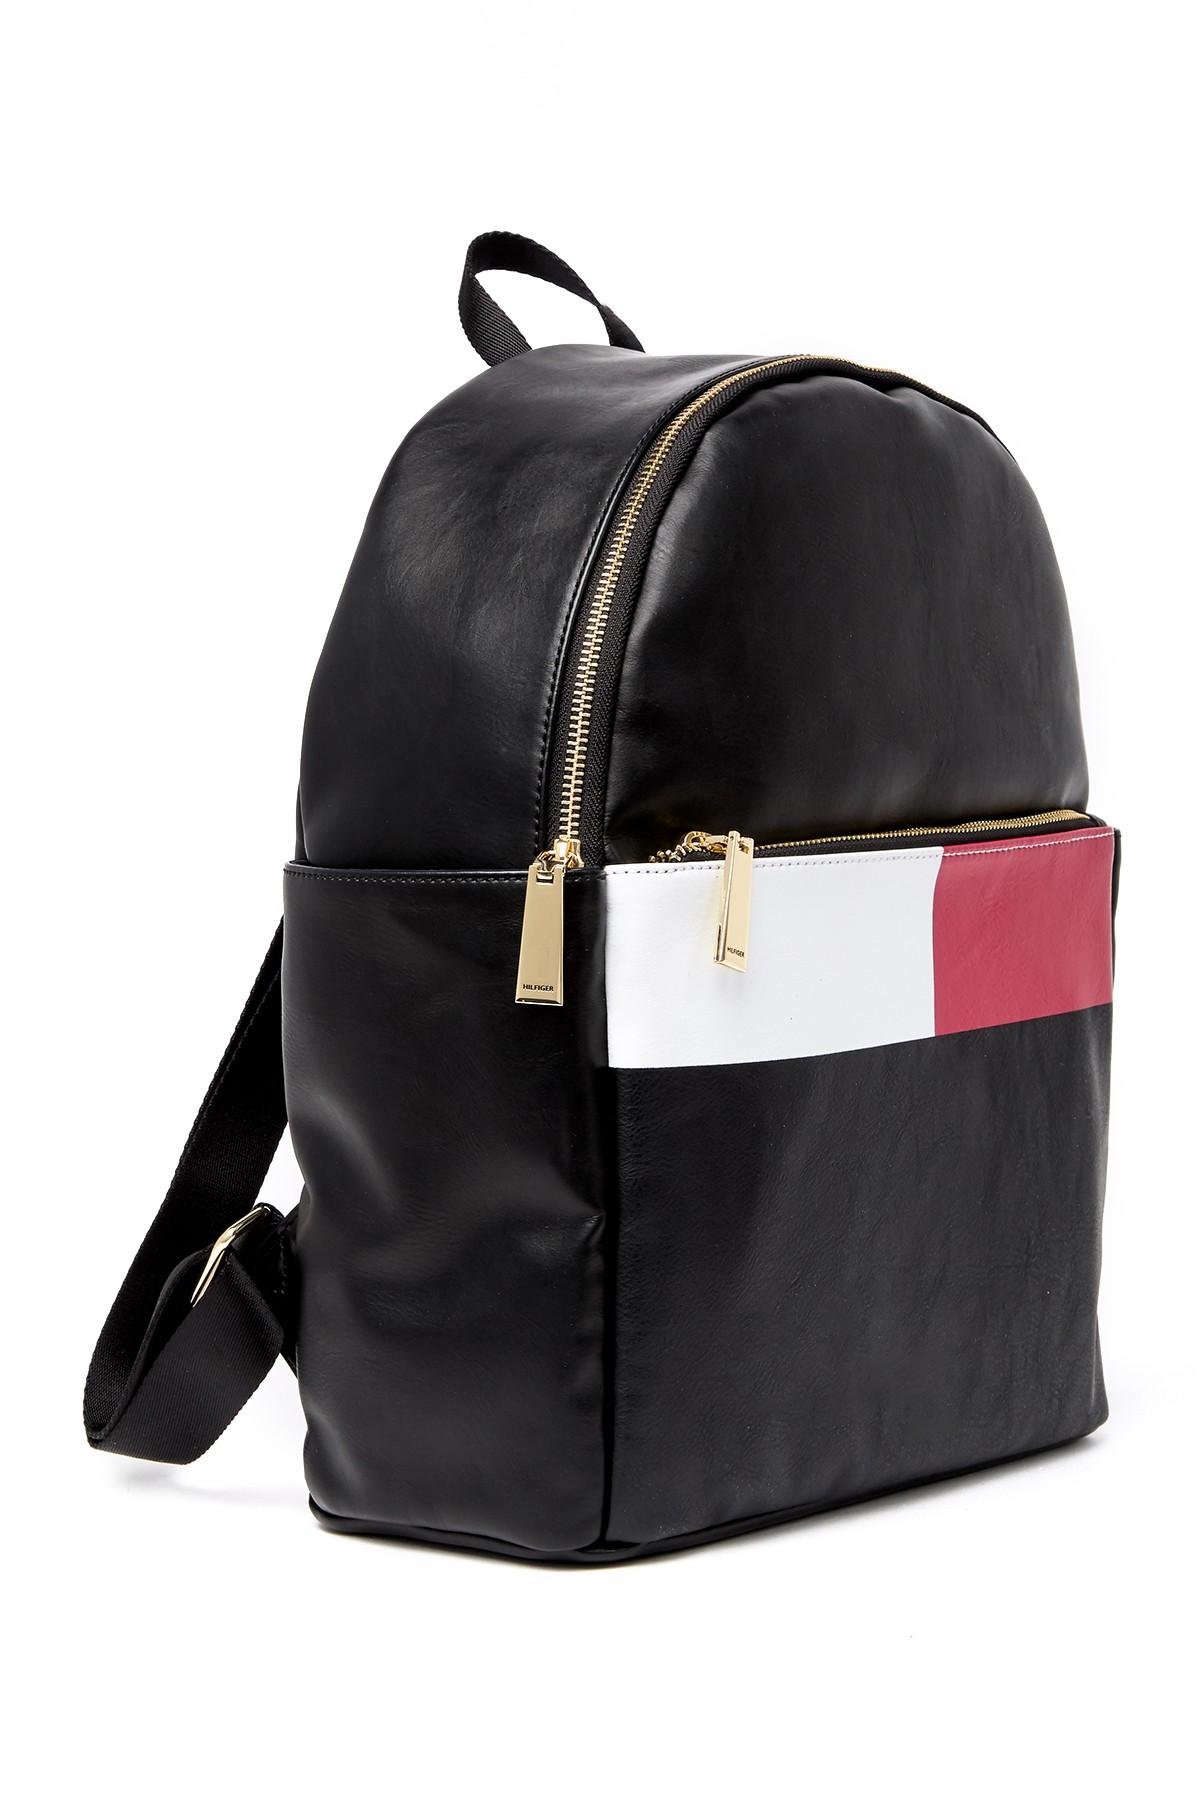 Tommy Hilfiger Sirina Smooth Dome Backpack in Black - Lyst